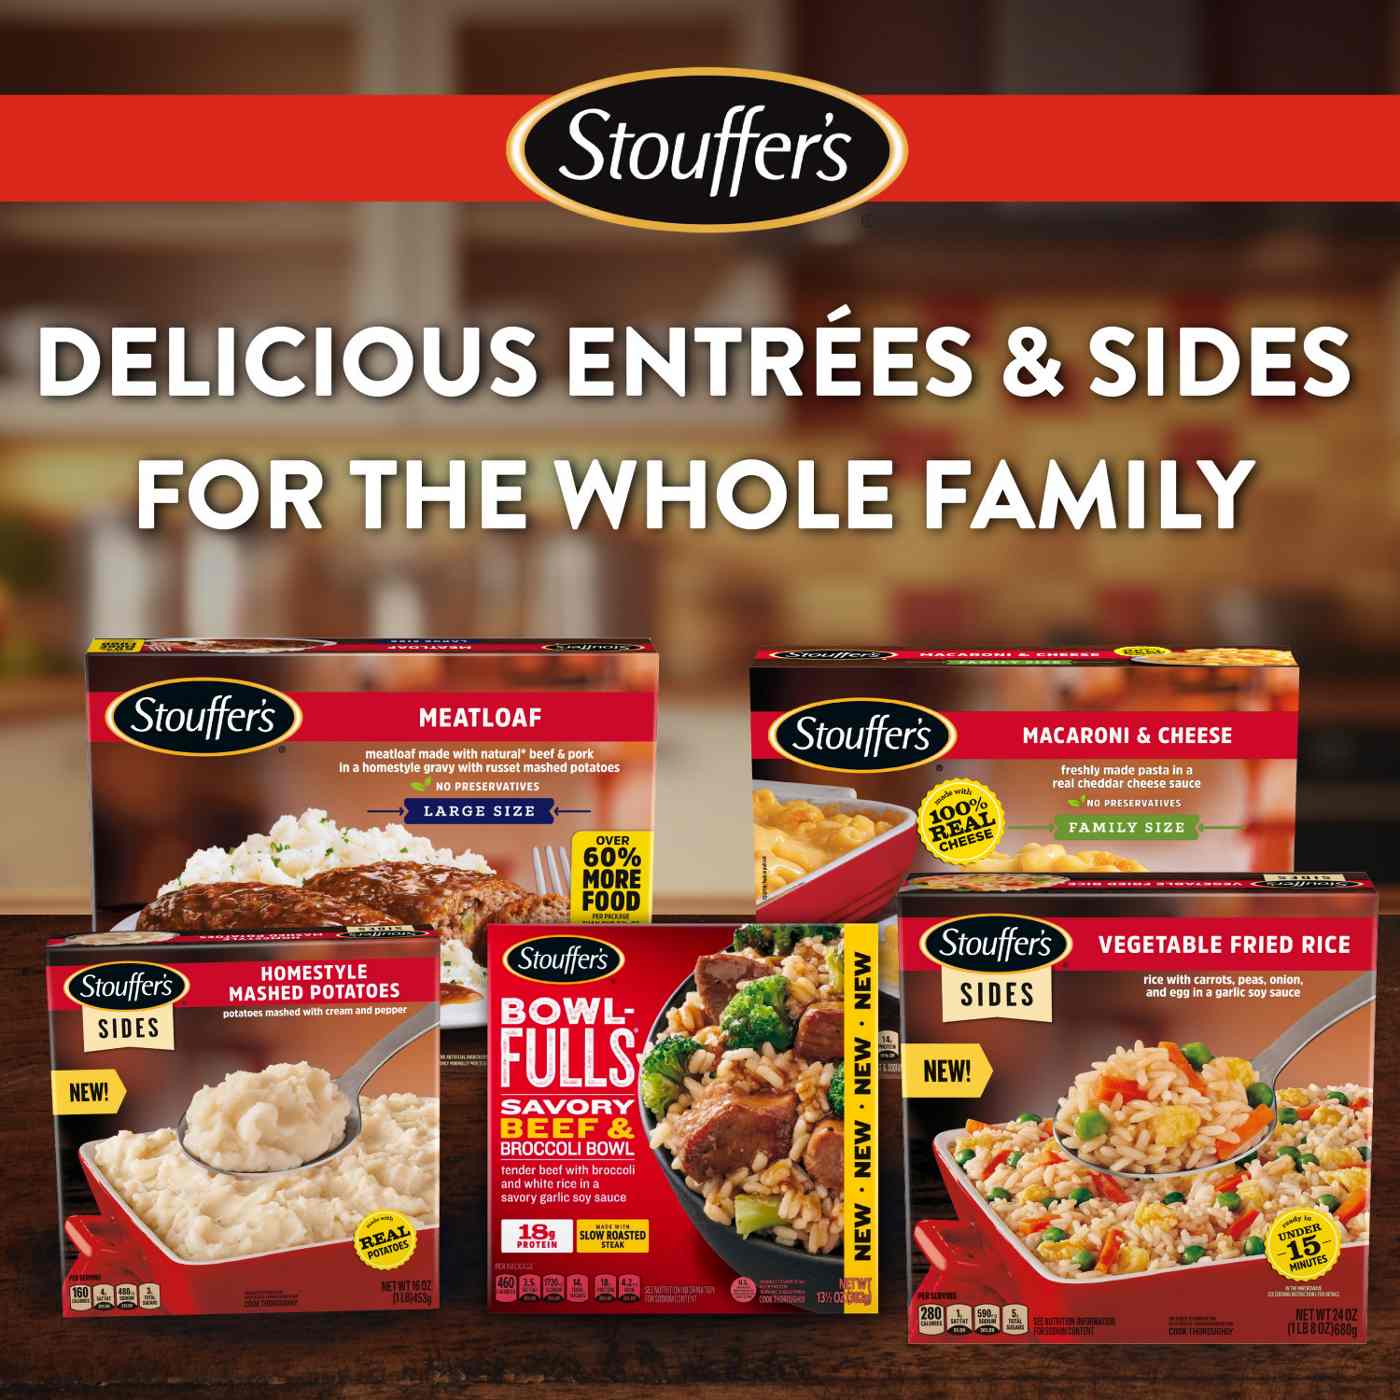 Stouffer's Meatloaf & Mashed Potatoes Frozen Meal - Large Size; image 5 of 7